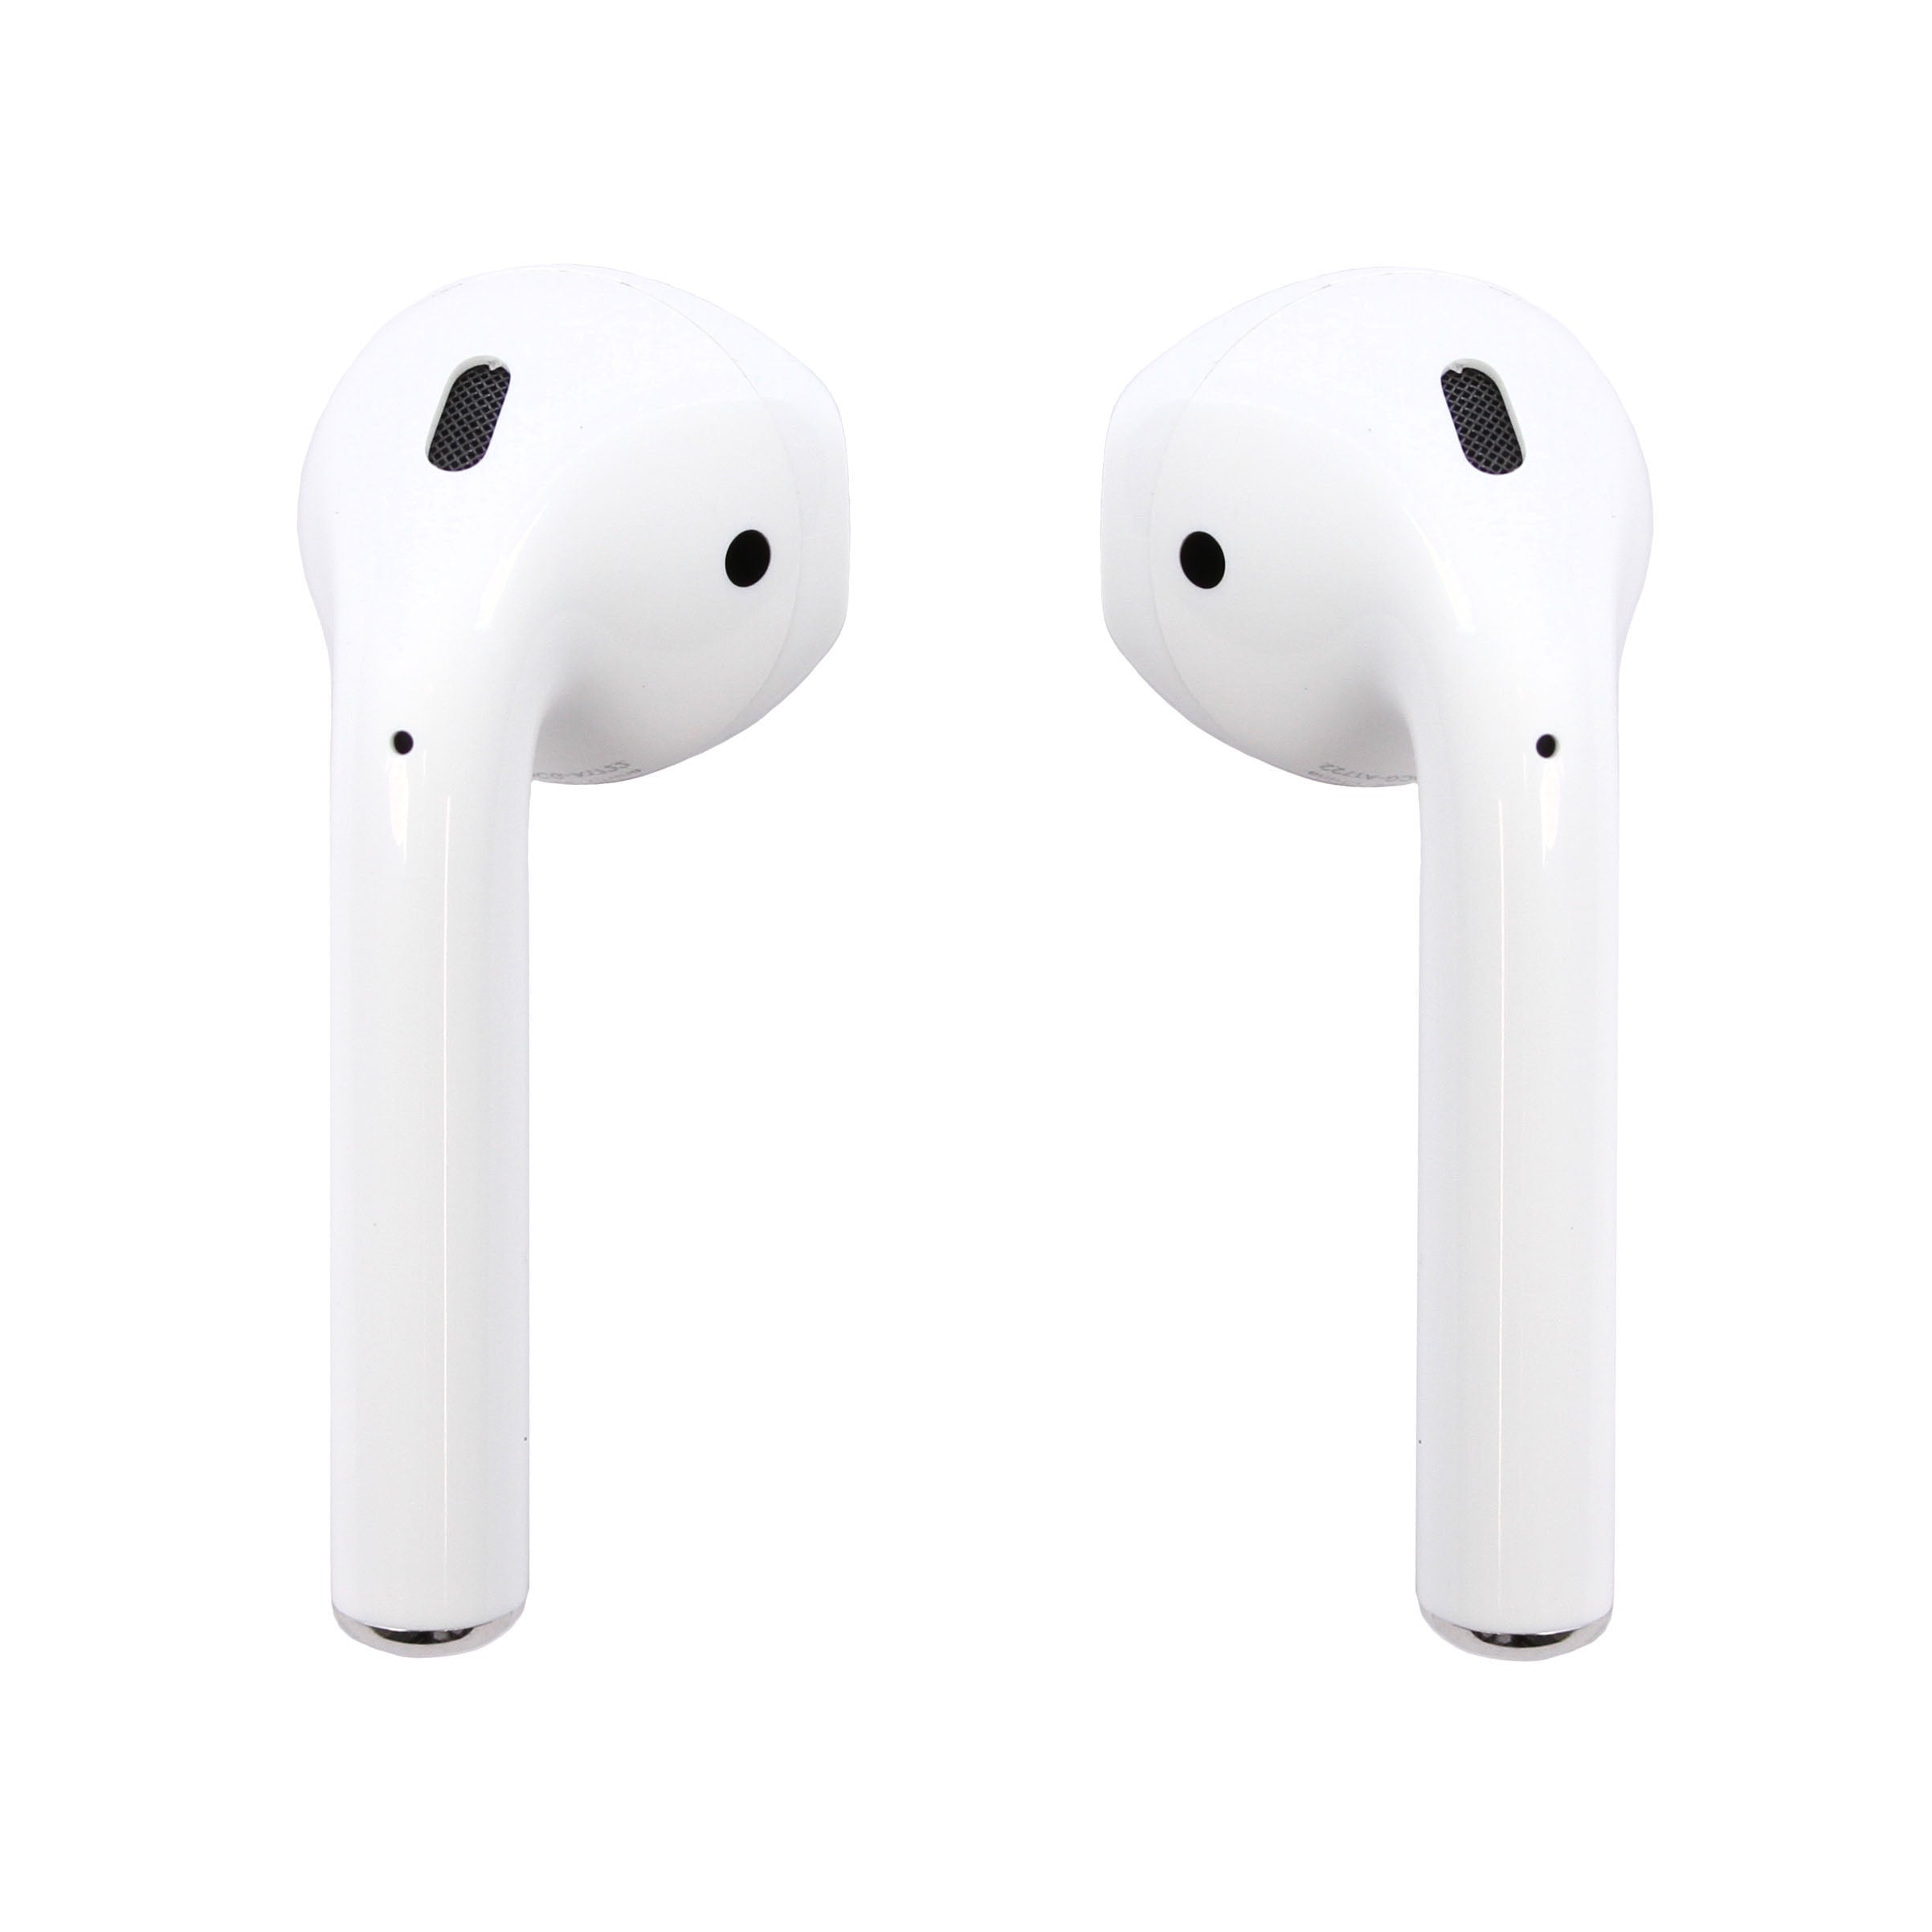 Apple AirPods 2 with Charging Case - White (New)